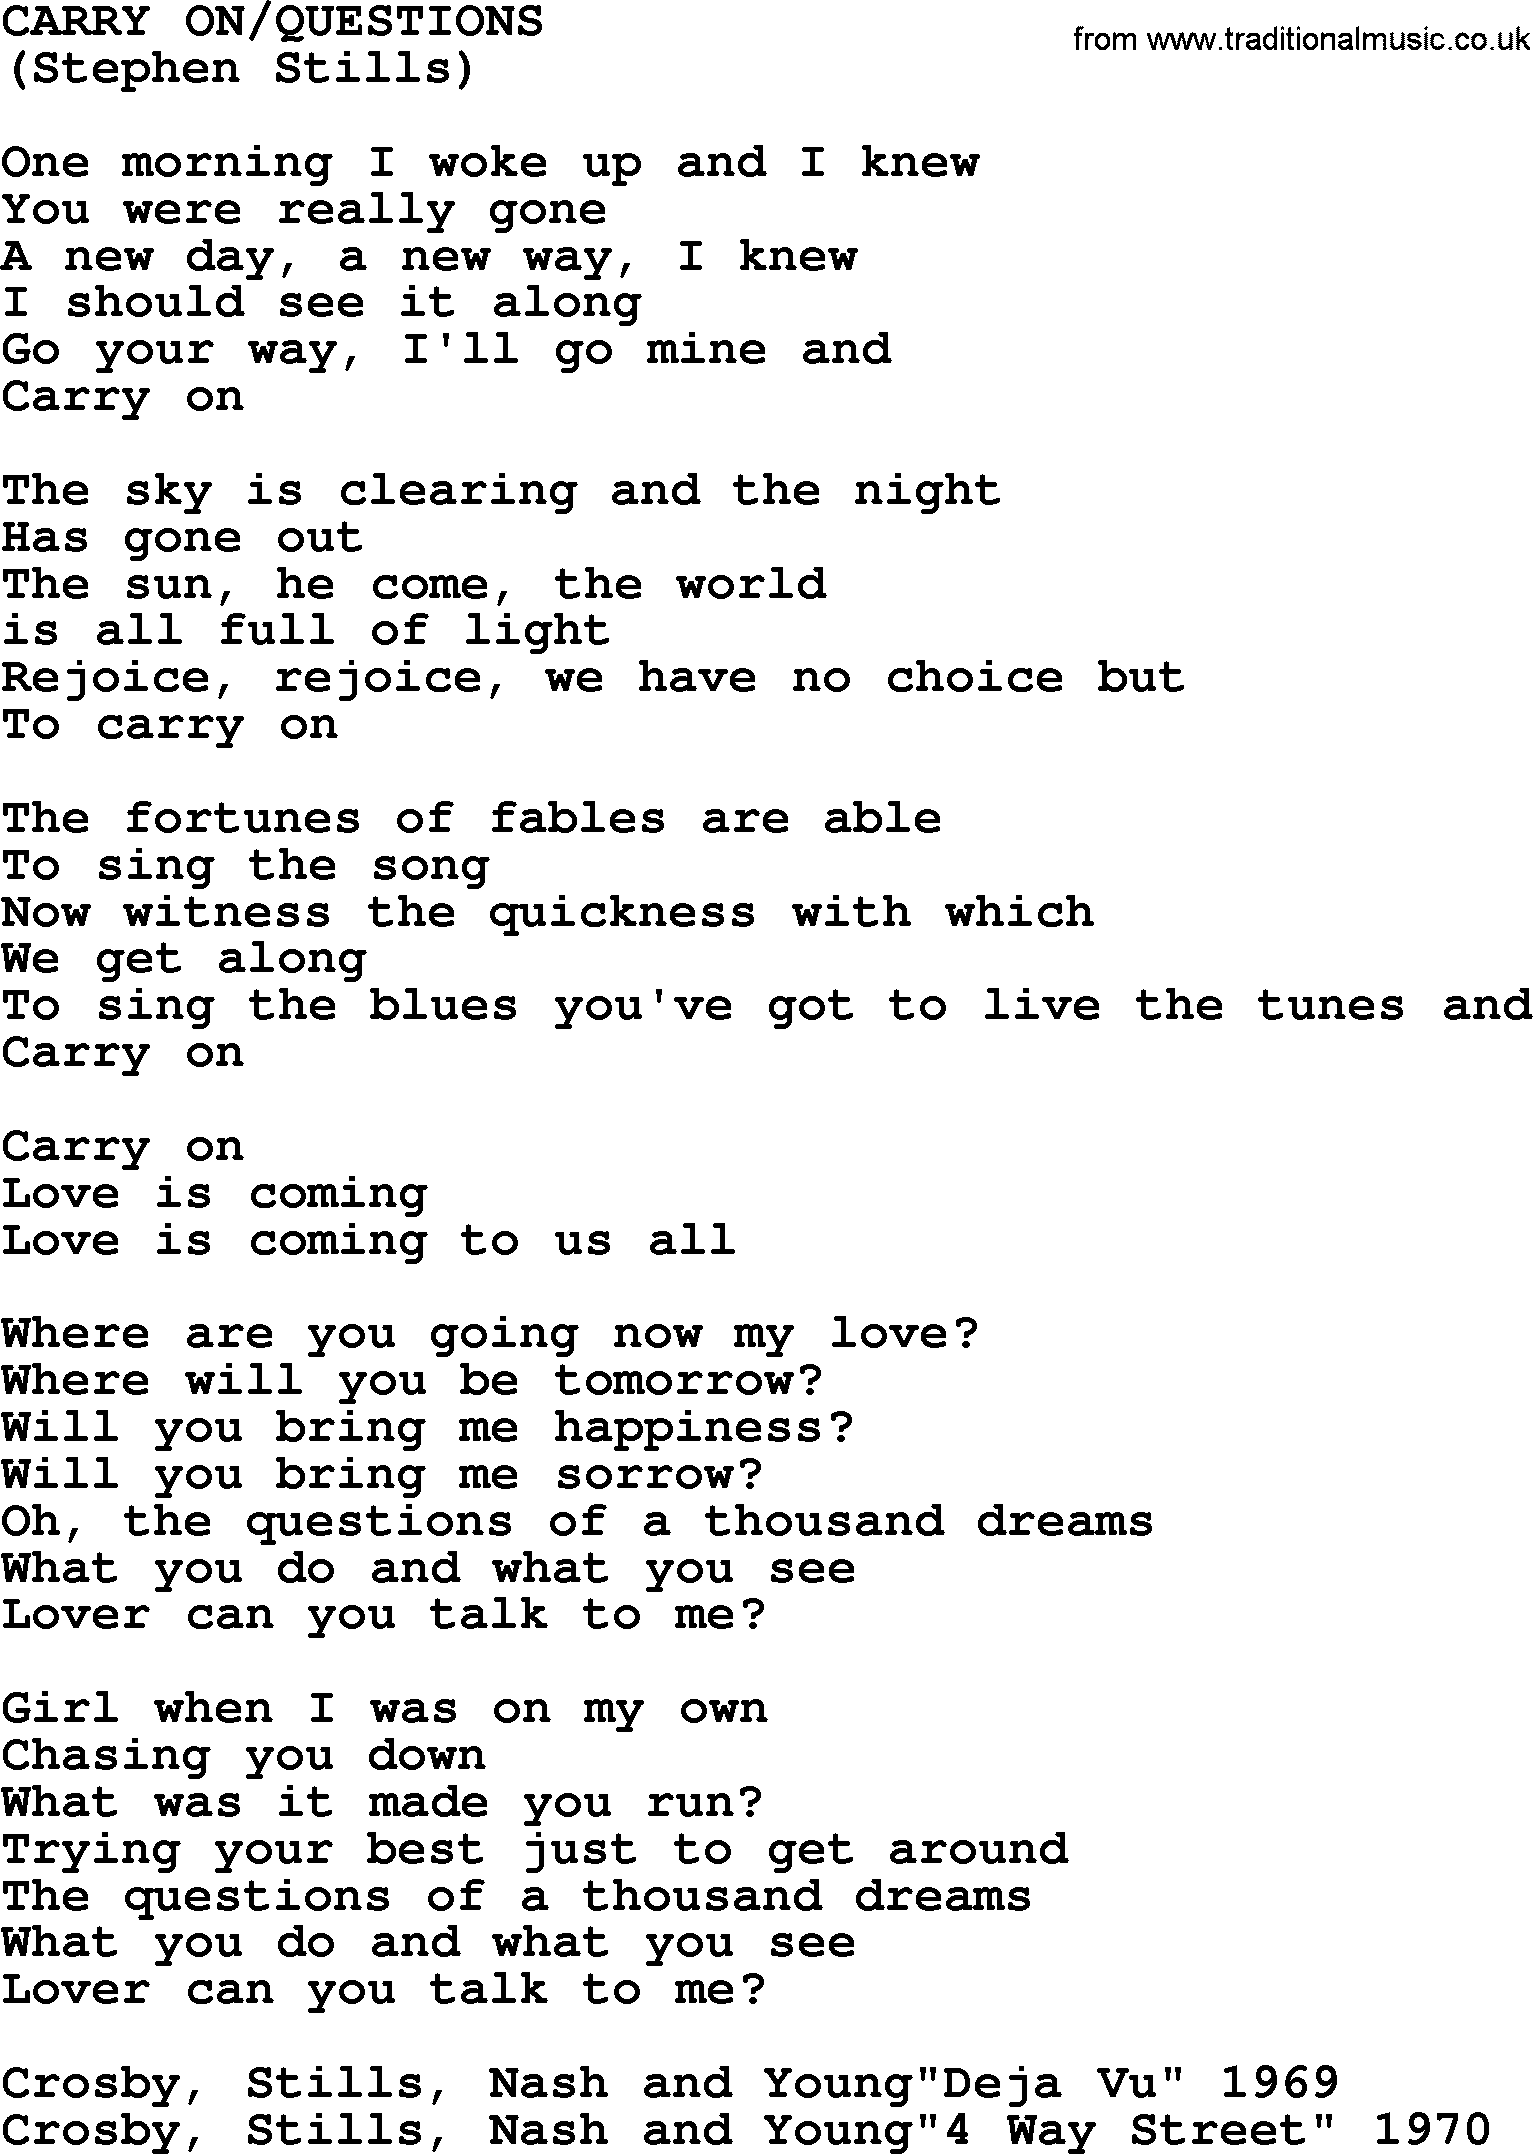 The Byrds song Carry On Questions, lyrics